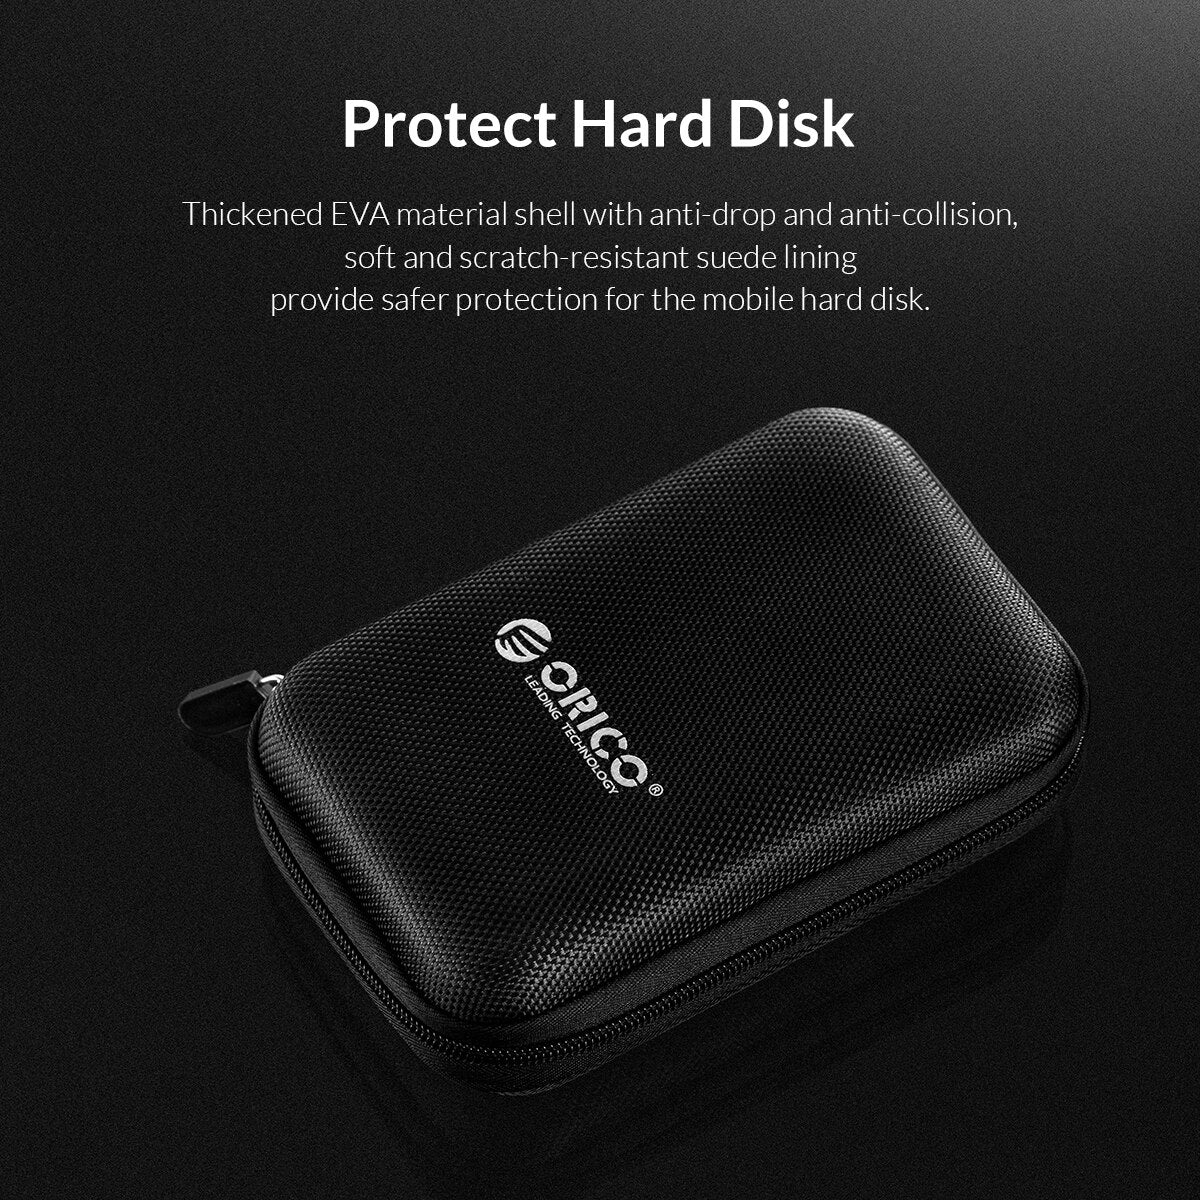 ORICO 2.5 inch hard disk box solid color protection bag portable hard disk case suitable for hard disk storage protection